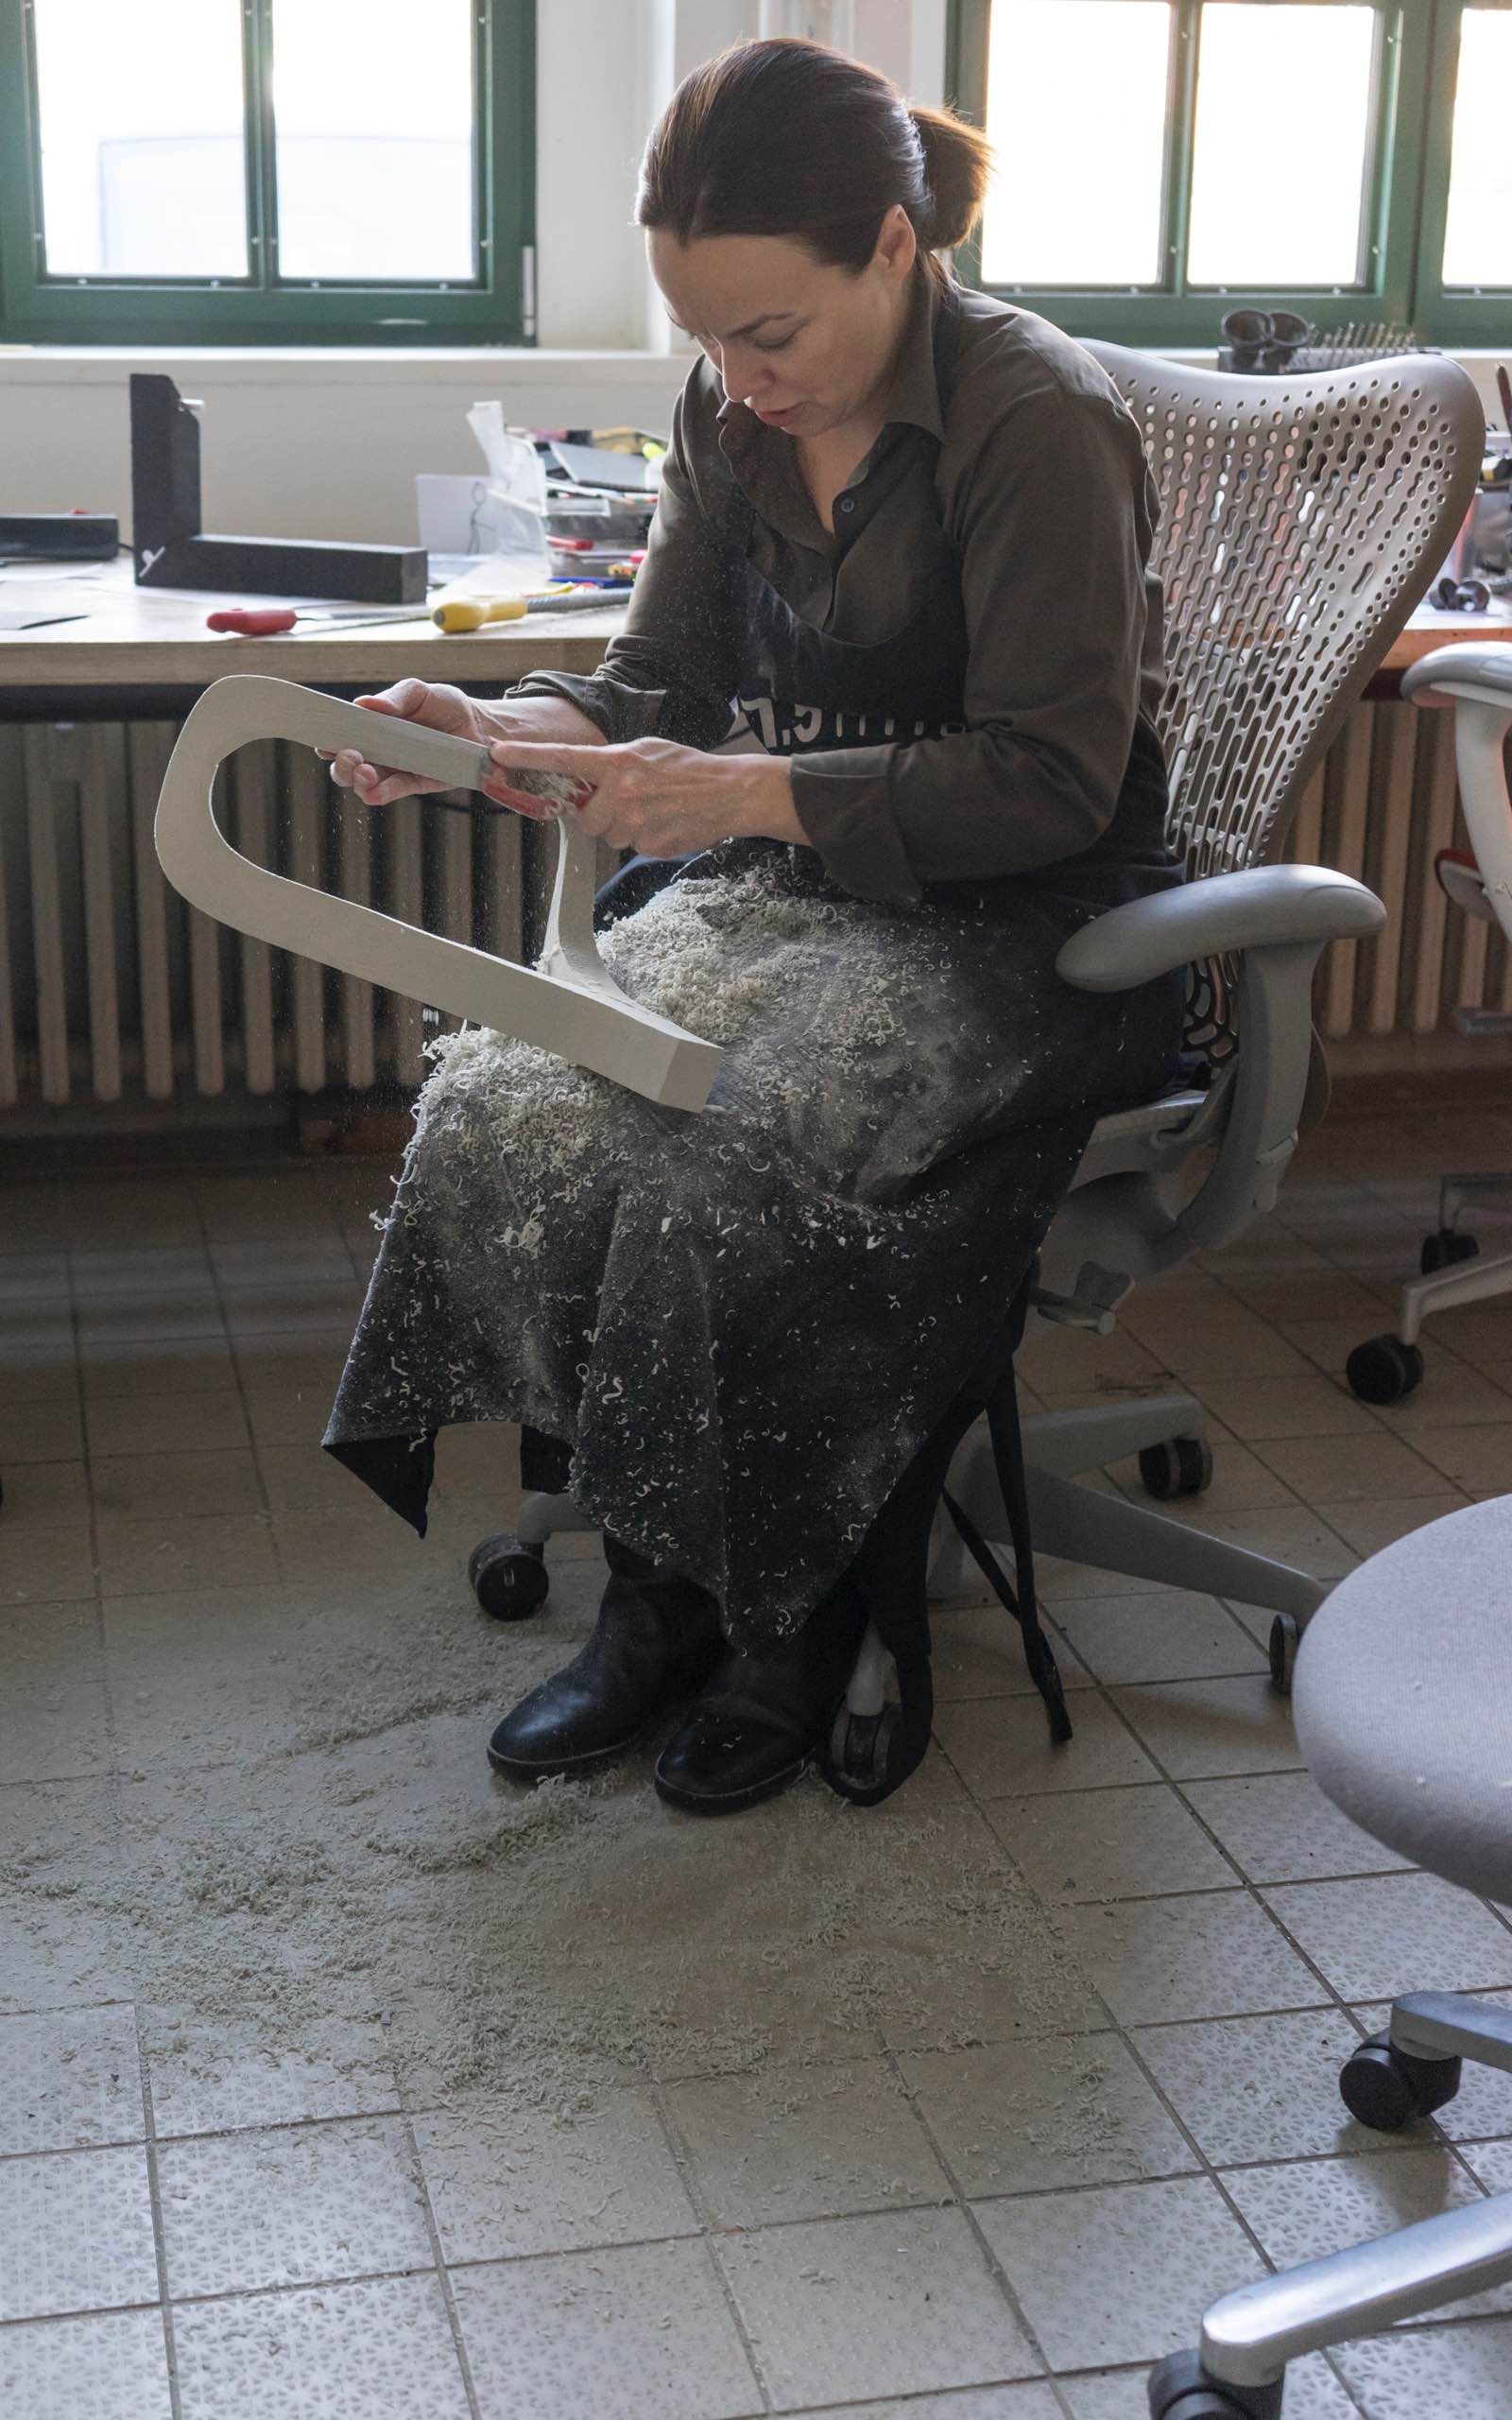 A member of Studio 7.5 shaves down material to make a model during the development of the Cosm Chair.